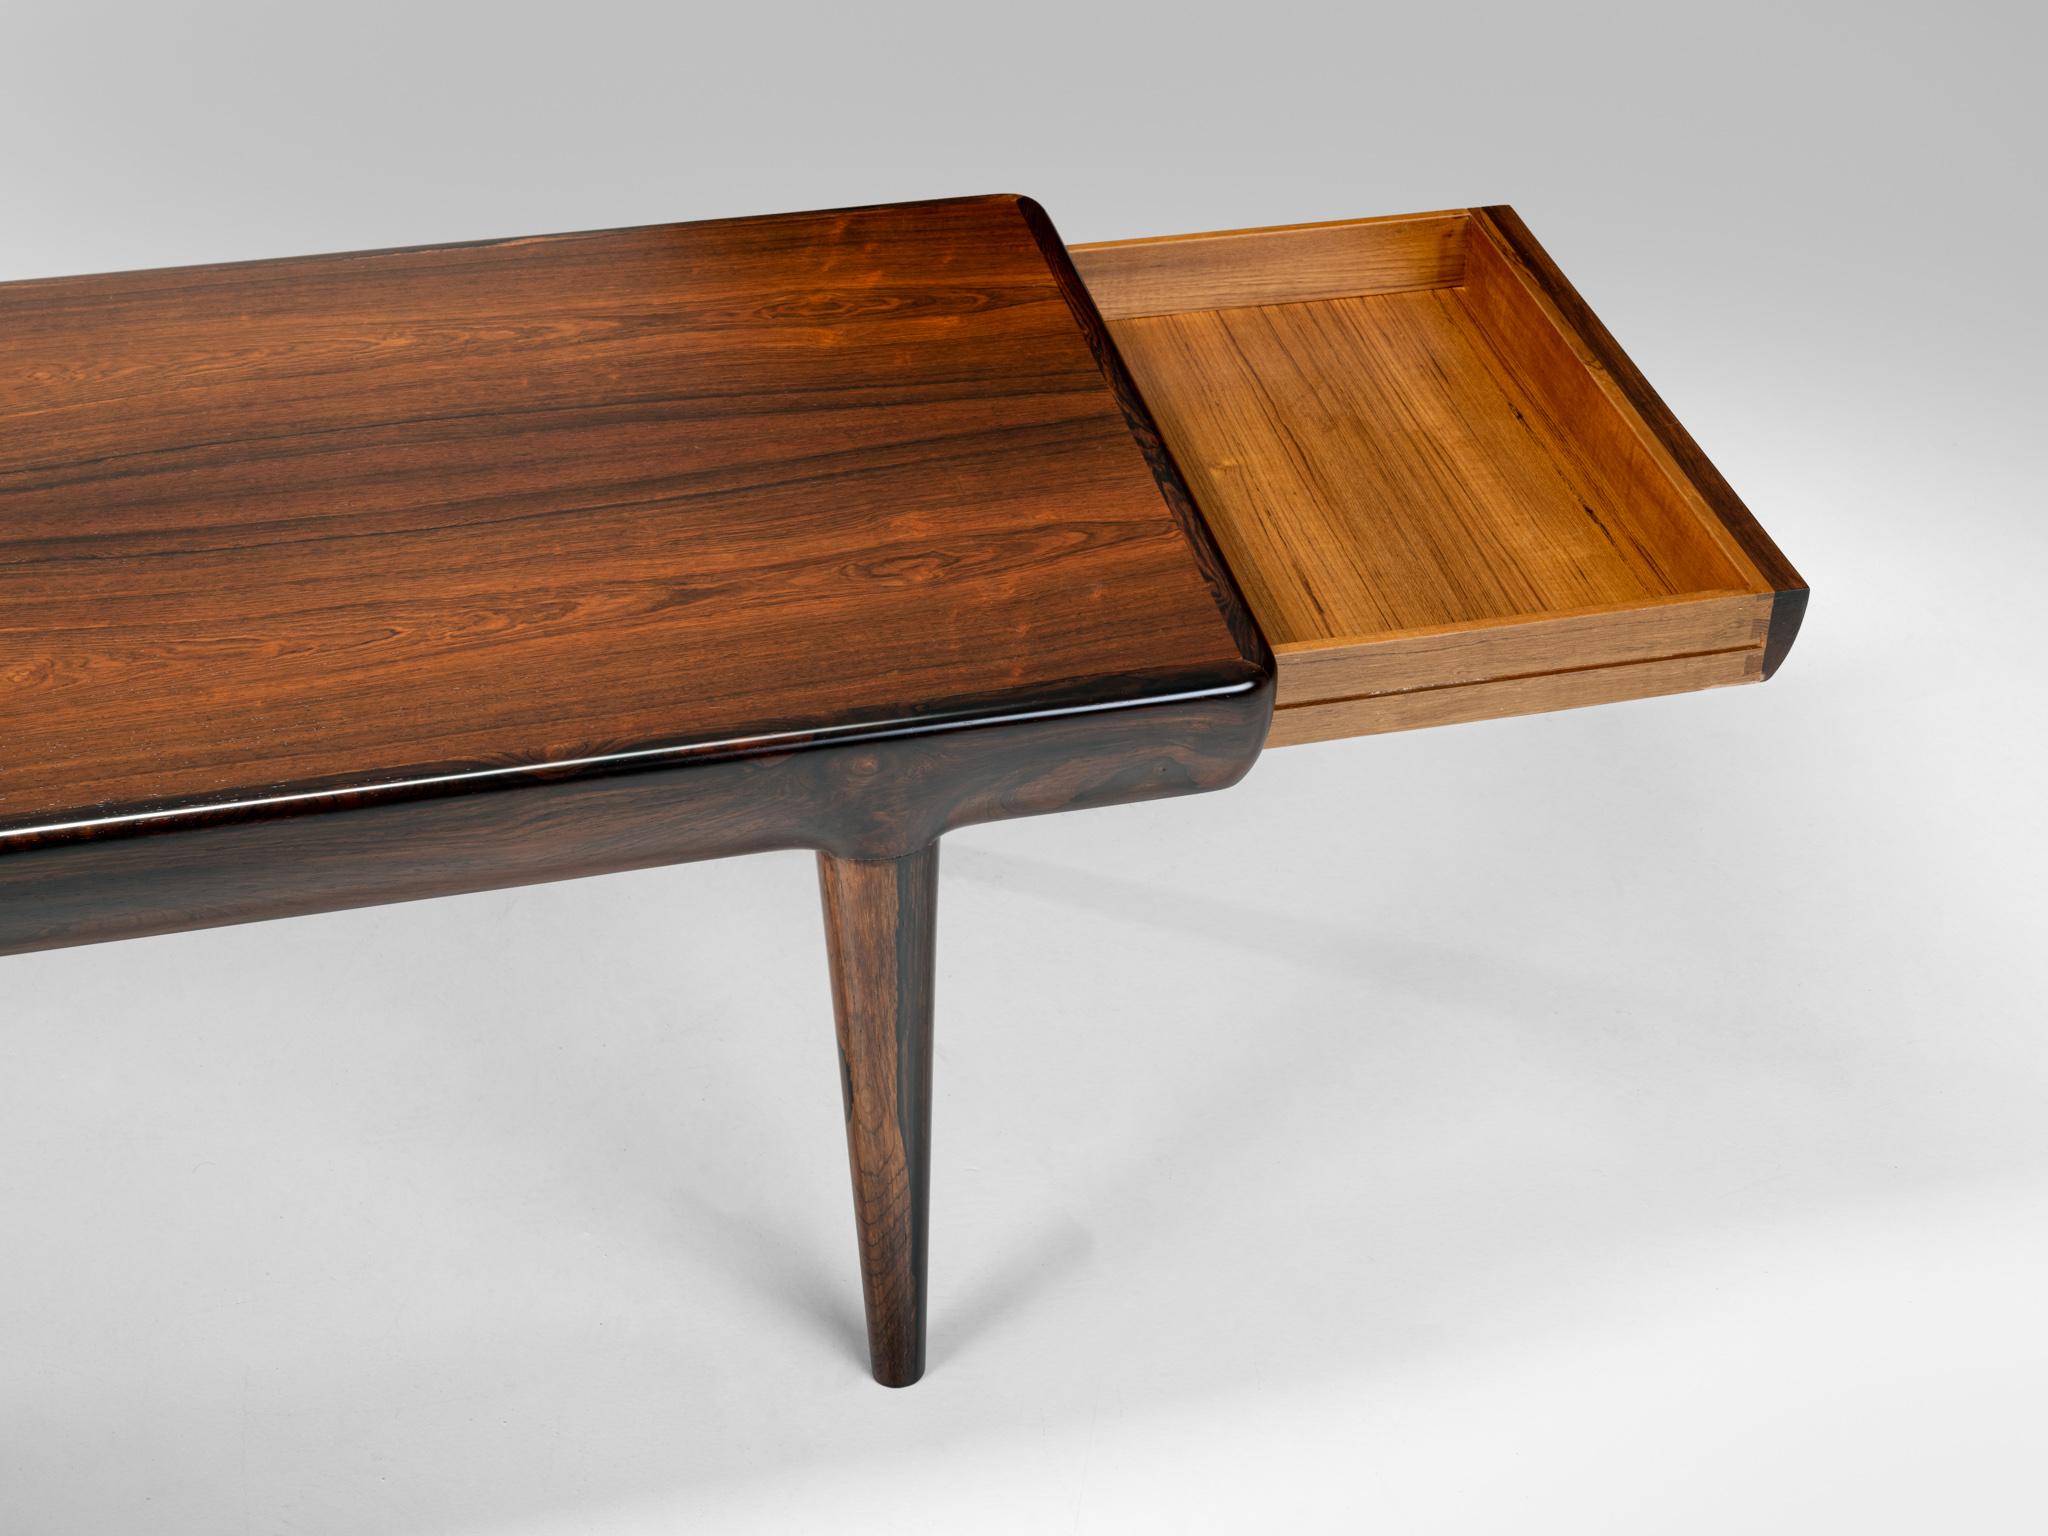 20th Century Johannes Andersen Rosewood Coffee Table for CFC Silkeborg, Denmark C1960 For Sale